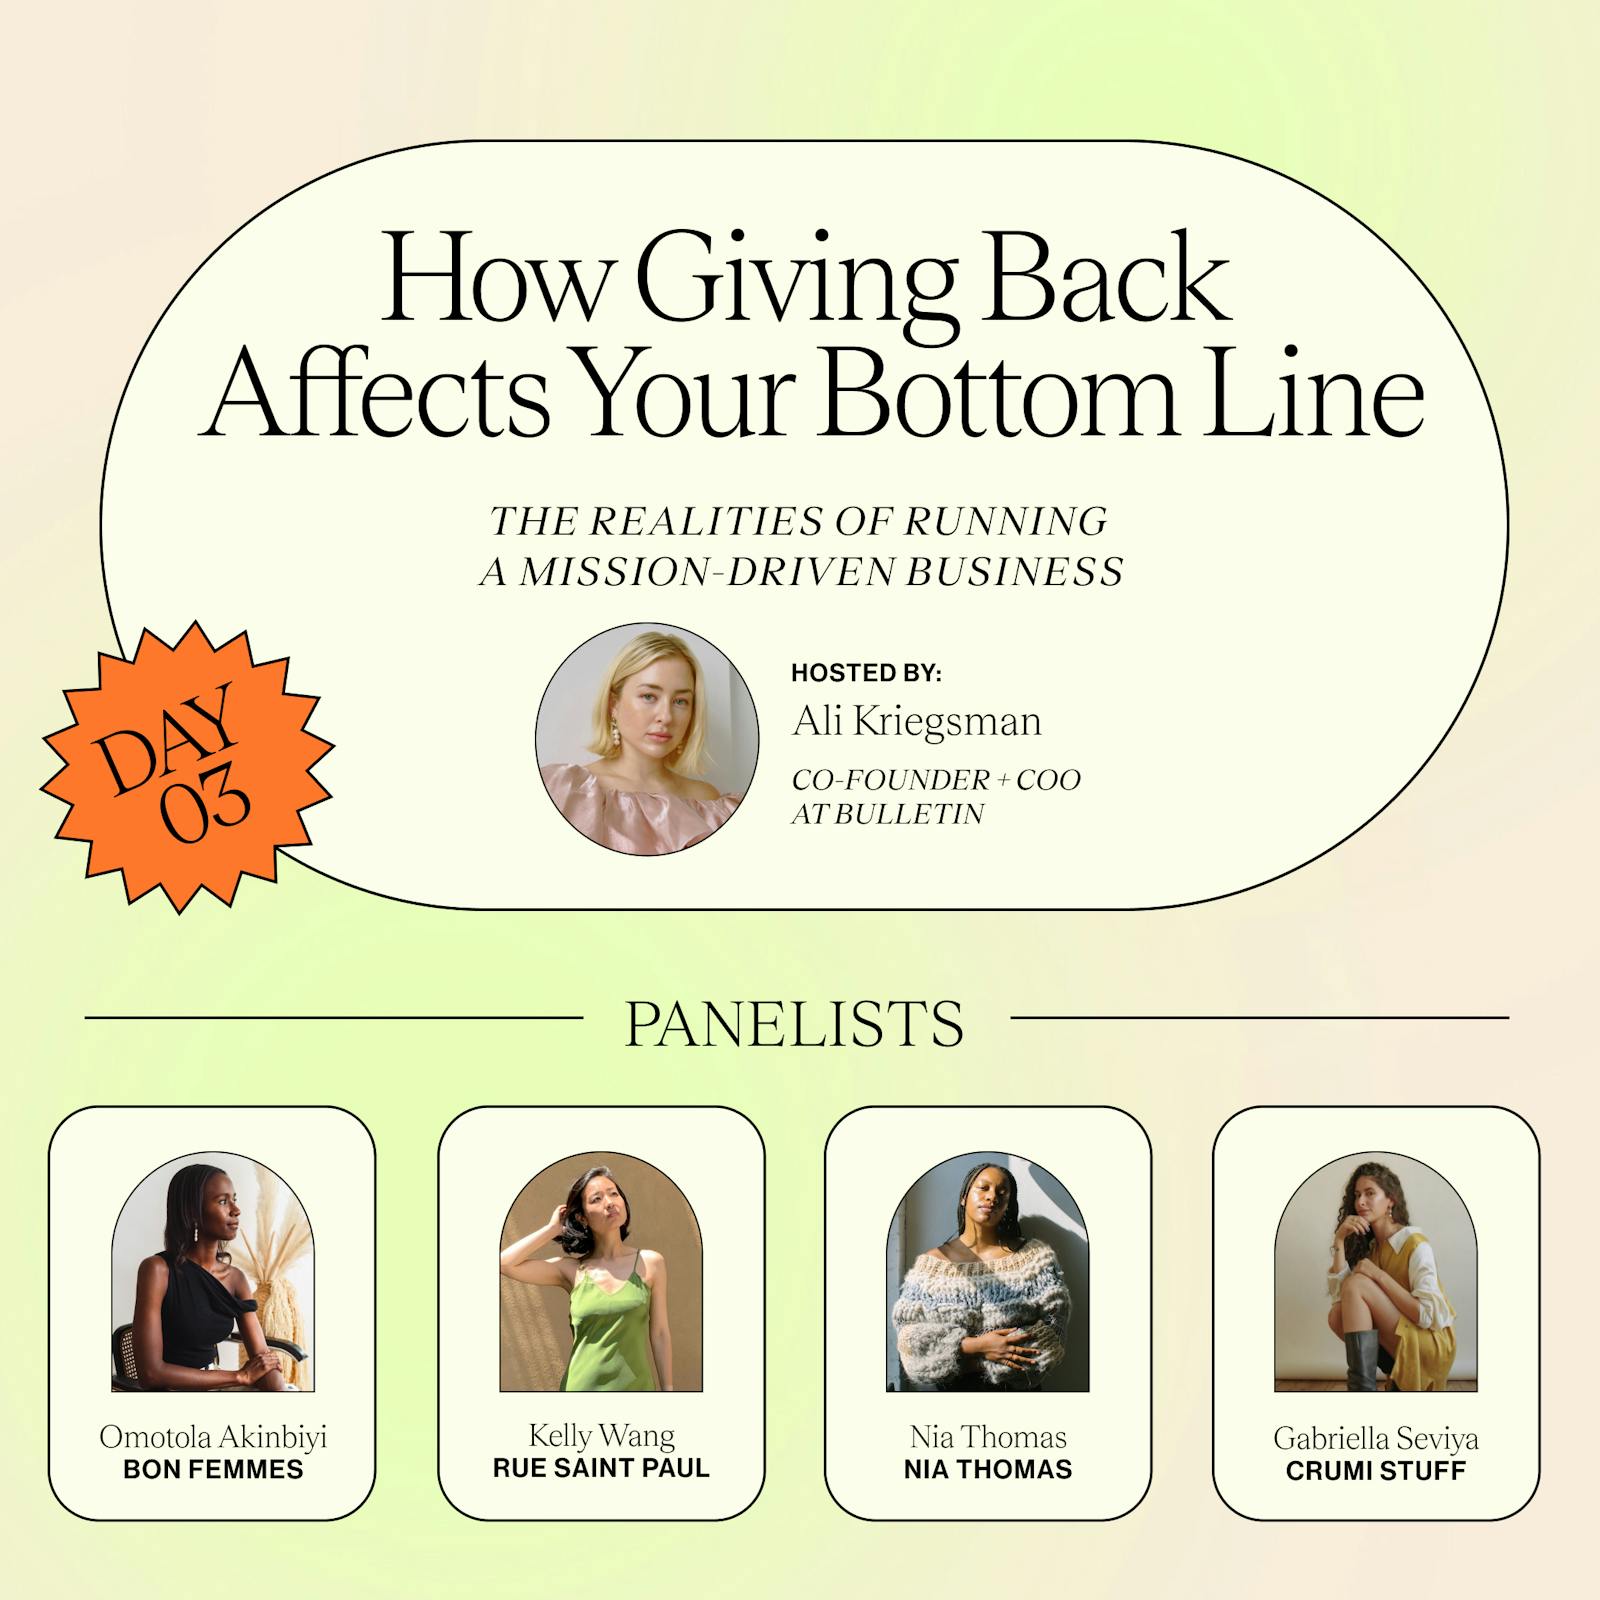 Day 03: How Giving Back Affects Your Bottom Line LIVE PANEL